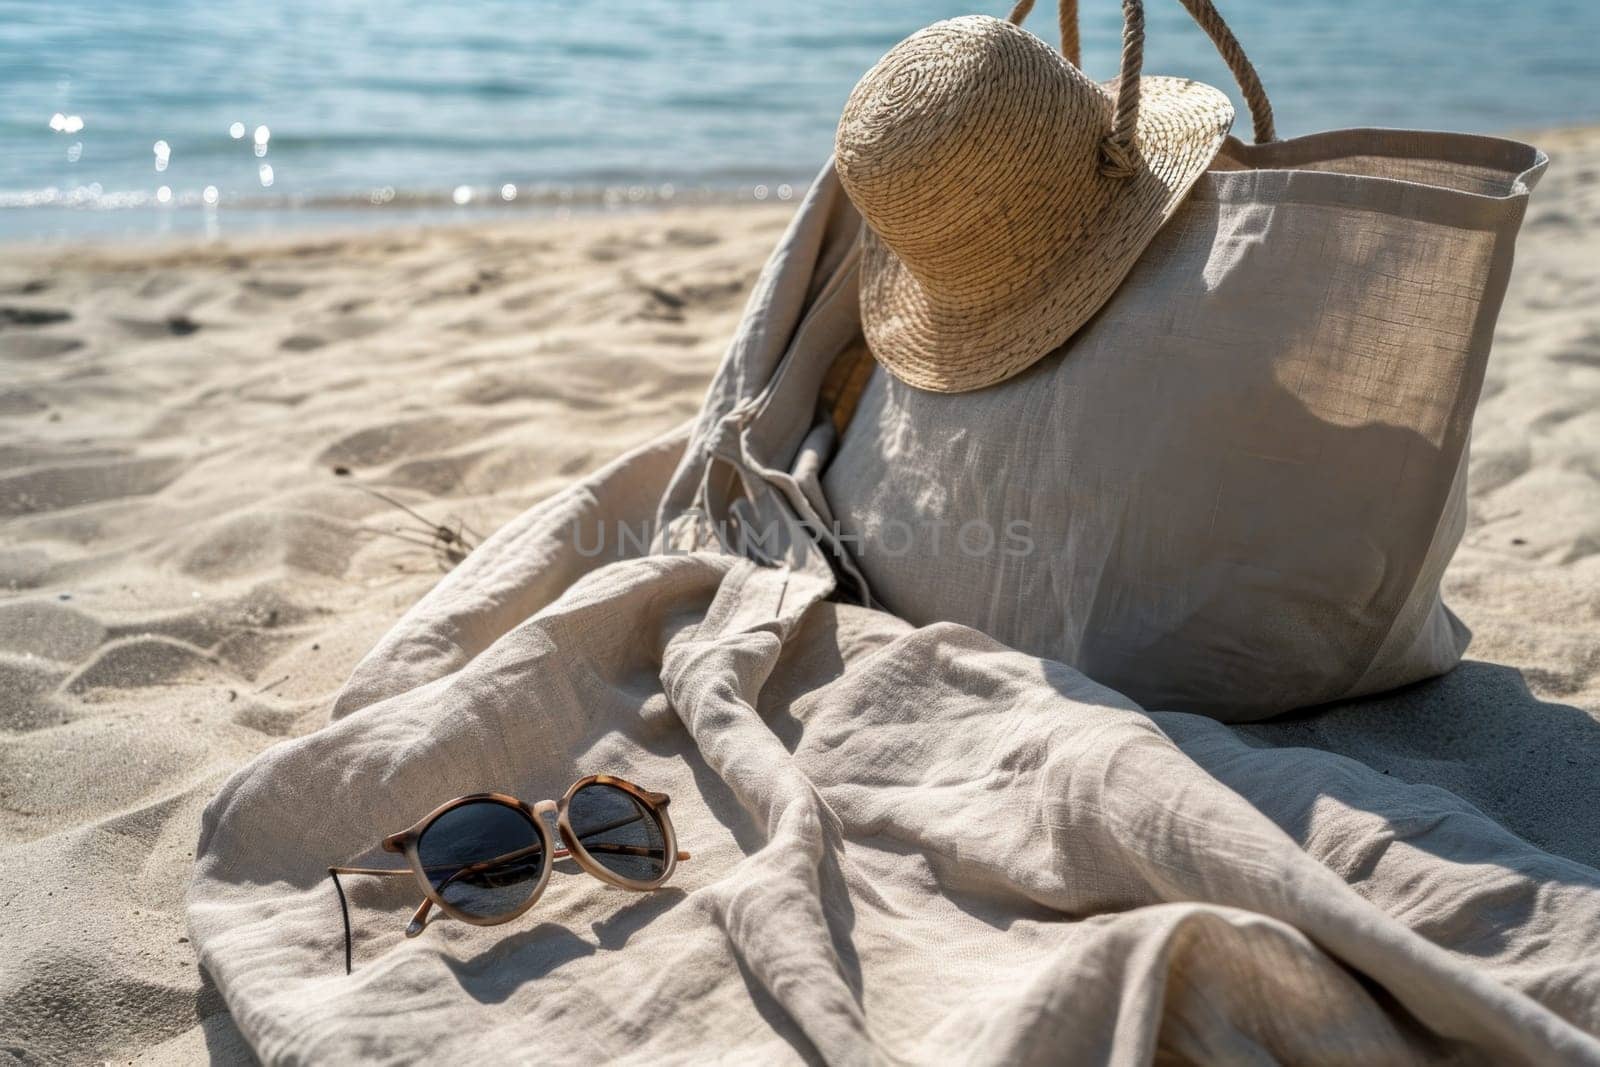 Straw hat, bag and sunglasses on a tropical beach.